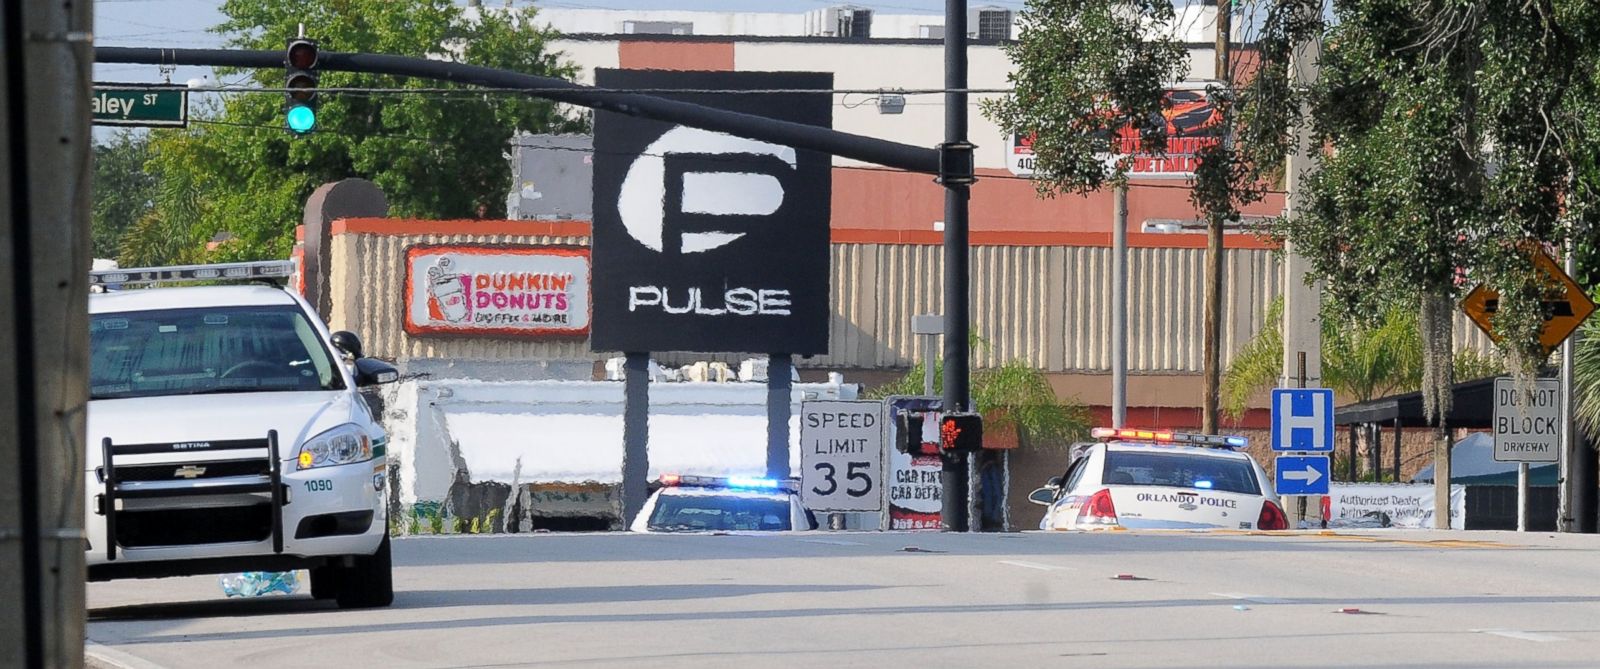 What We Know About Omar Mateen Suspected Orlando Night